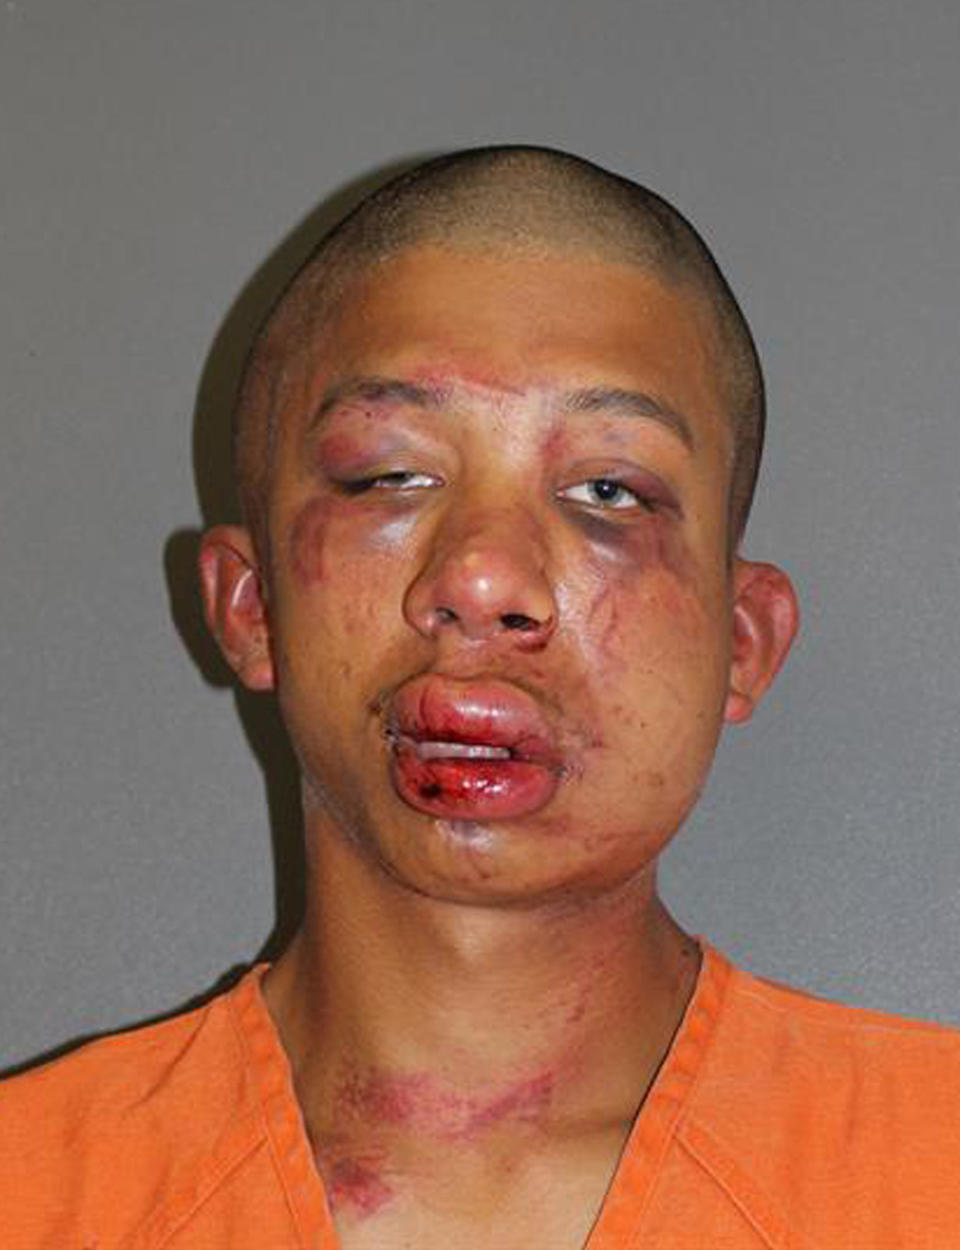 A Daytona Beach father beat an 18-year-old man unconscious after finding him sexually abusing his 11-year-old son early Friday morning, police said.